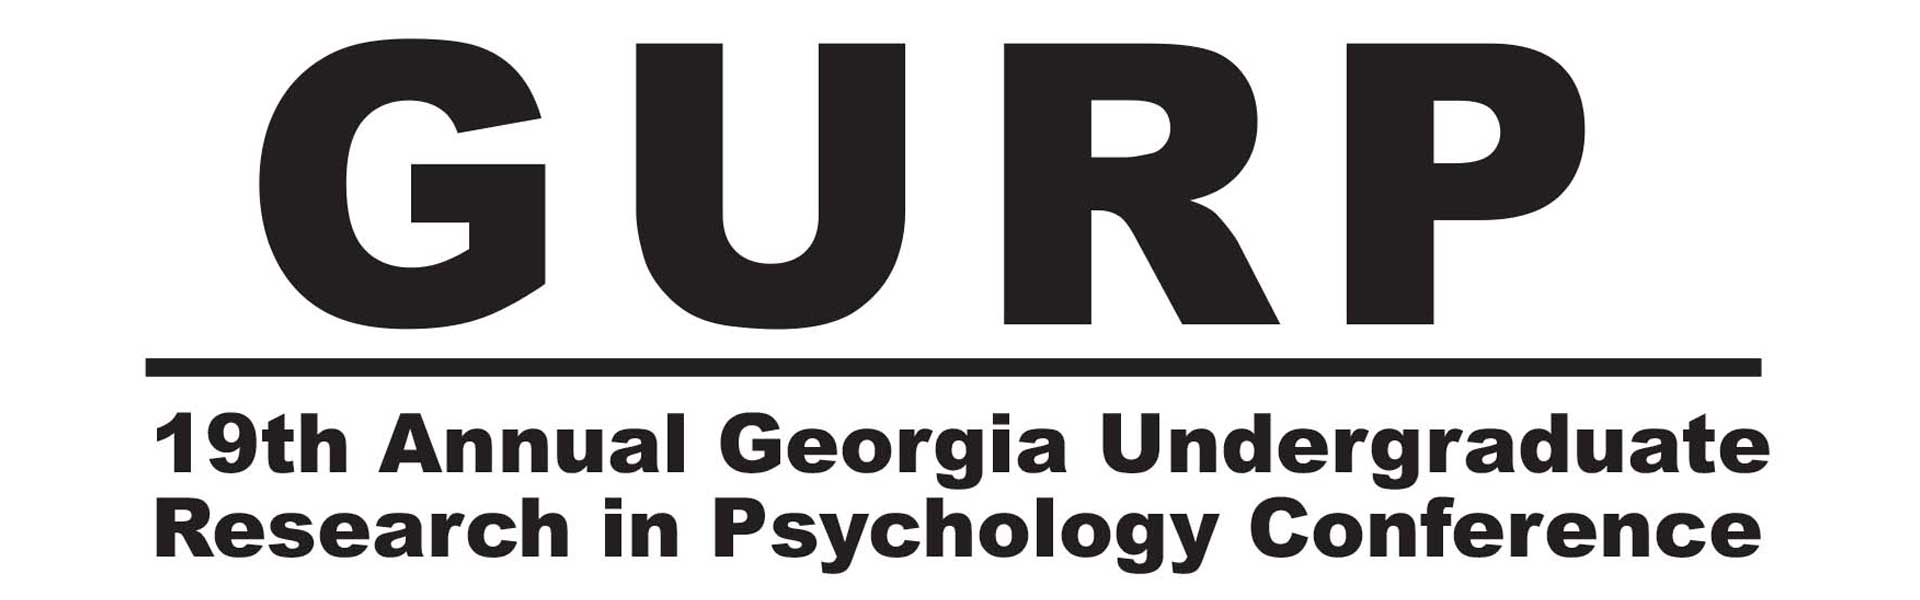 GURP 19th Annual Georgia Undergraduate Research in Psychology Conference